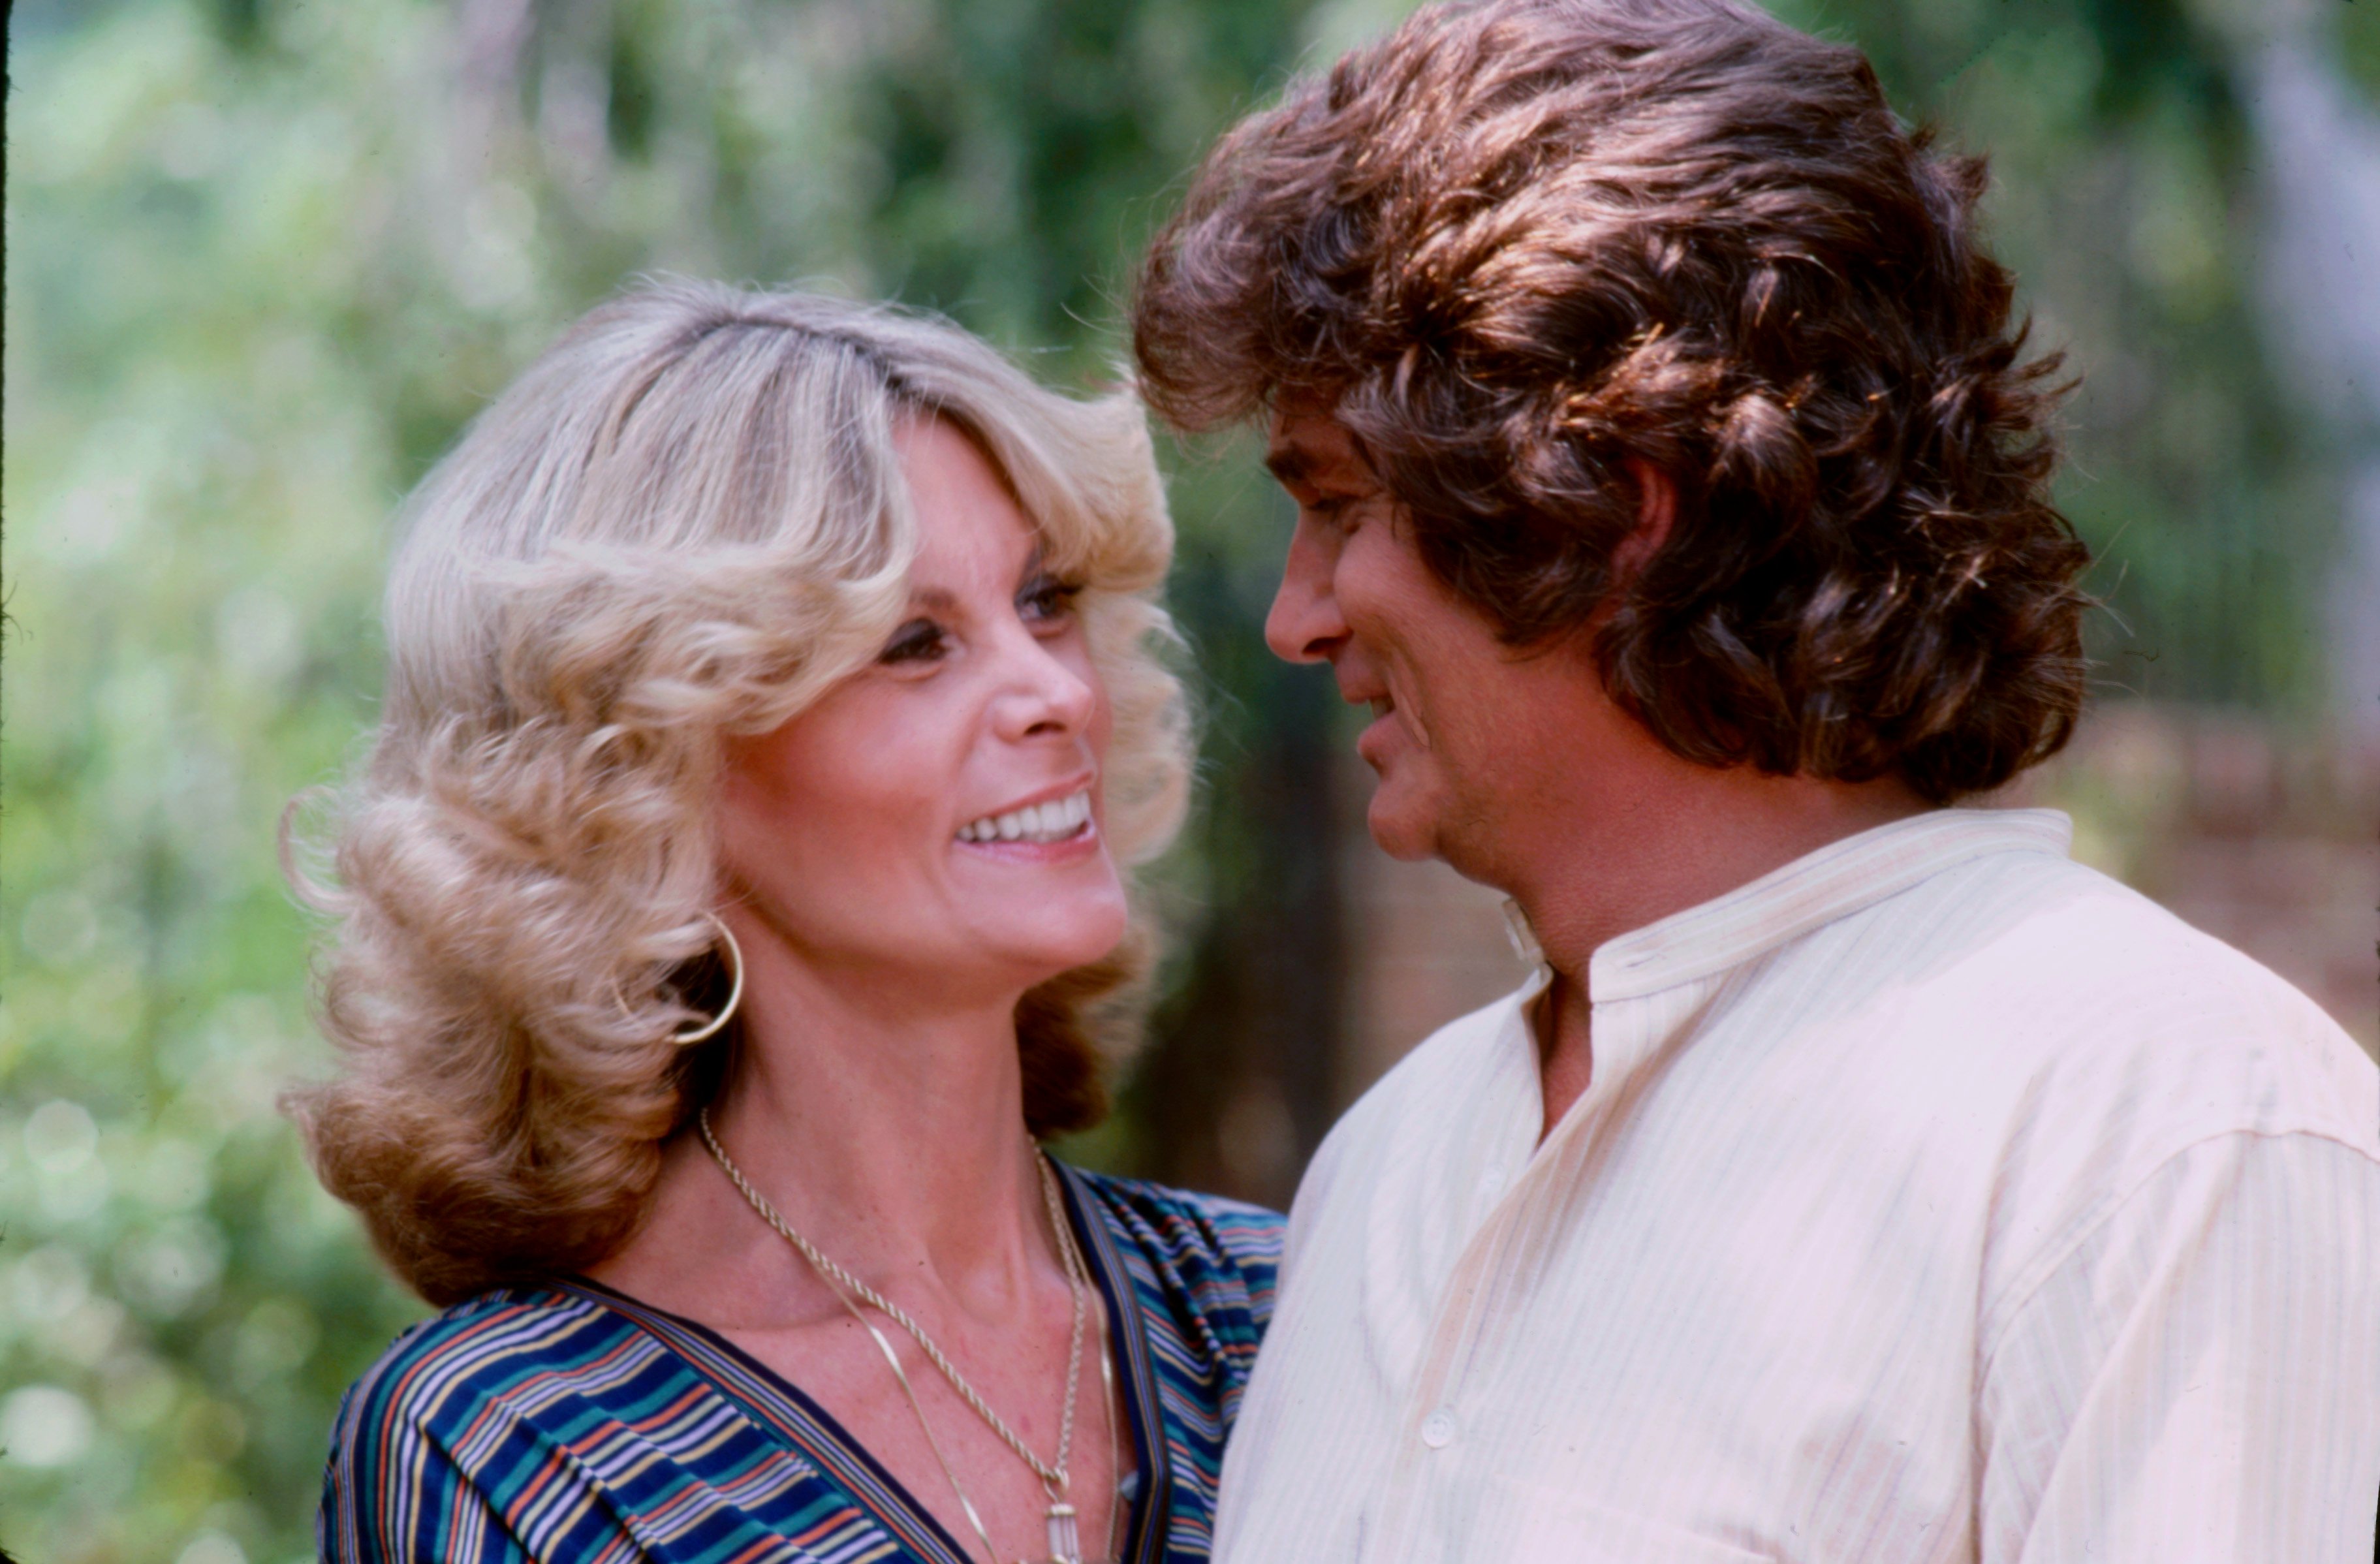 ) Marjorie Lynn Noe Landon, Michael Landon appearing on the ABC tv special 'The Barbara Walters Special'.